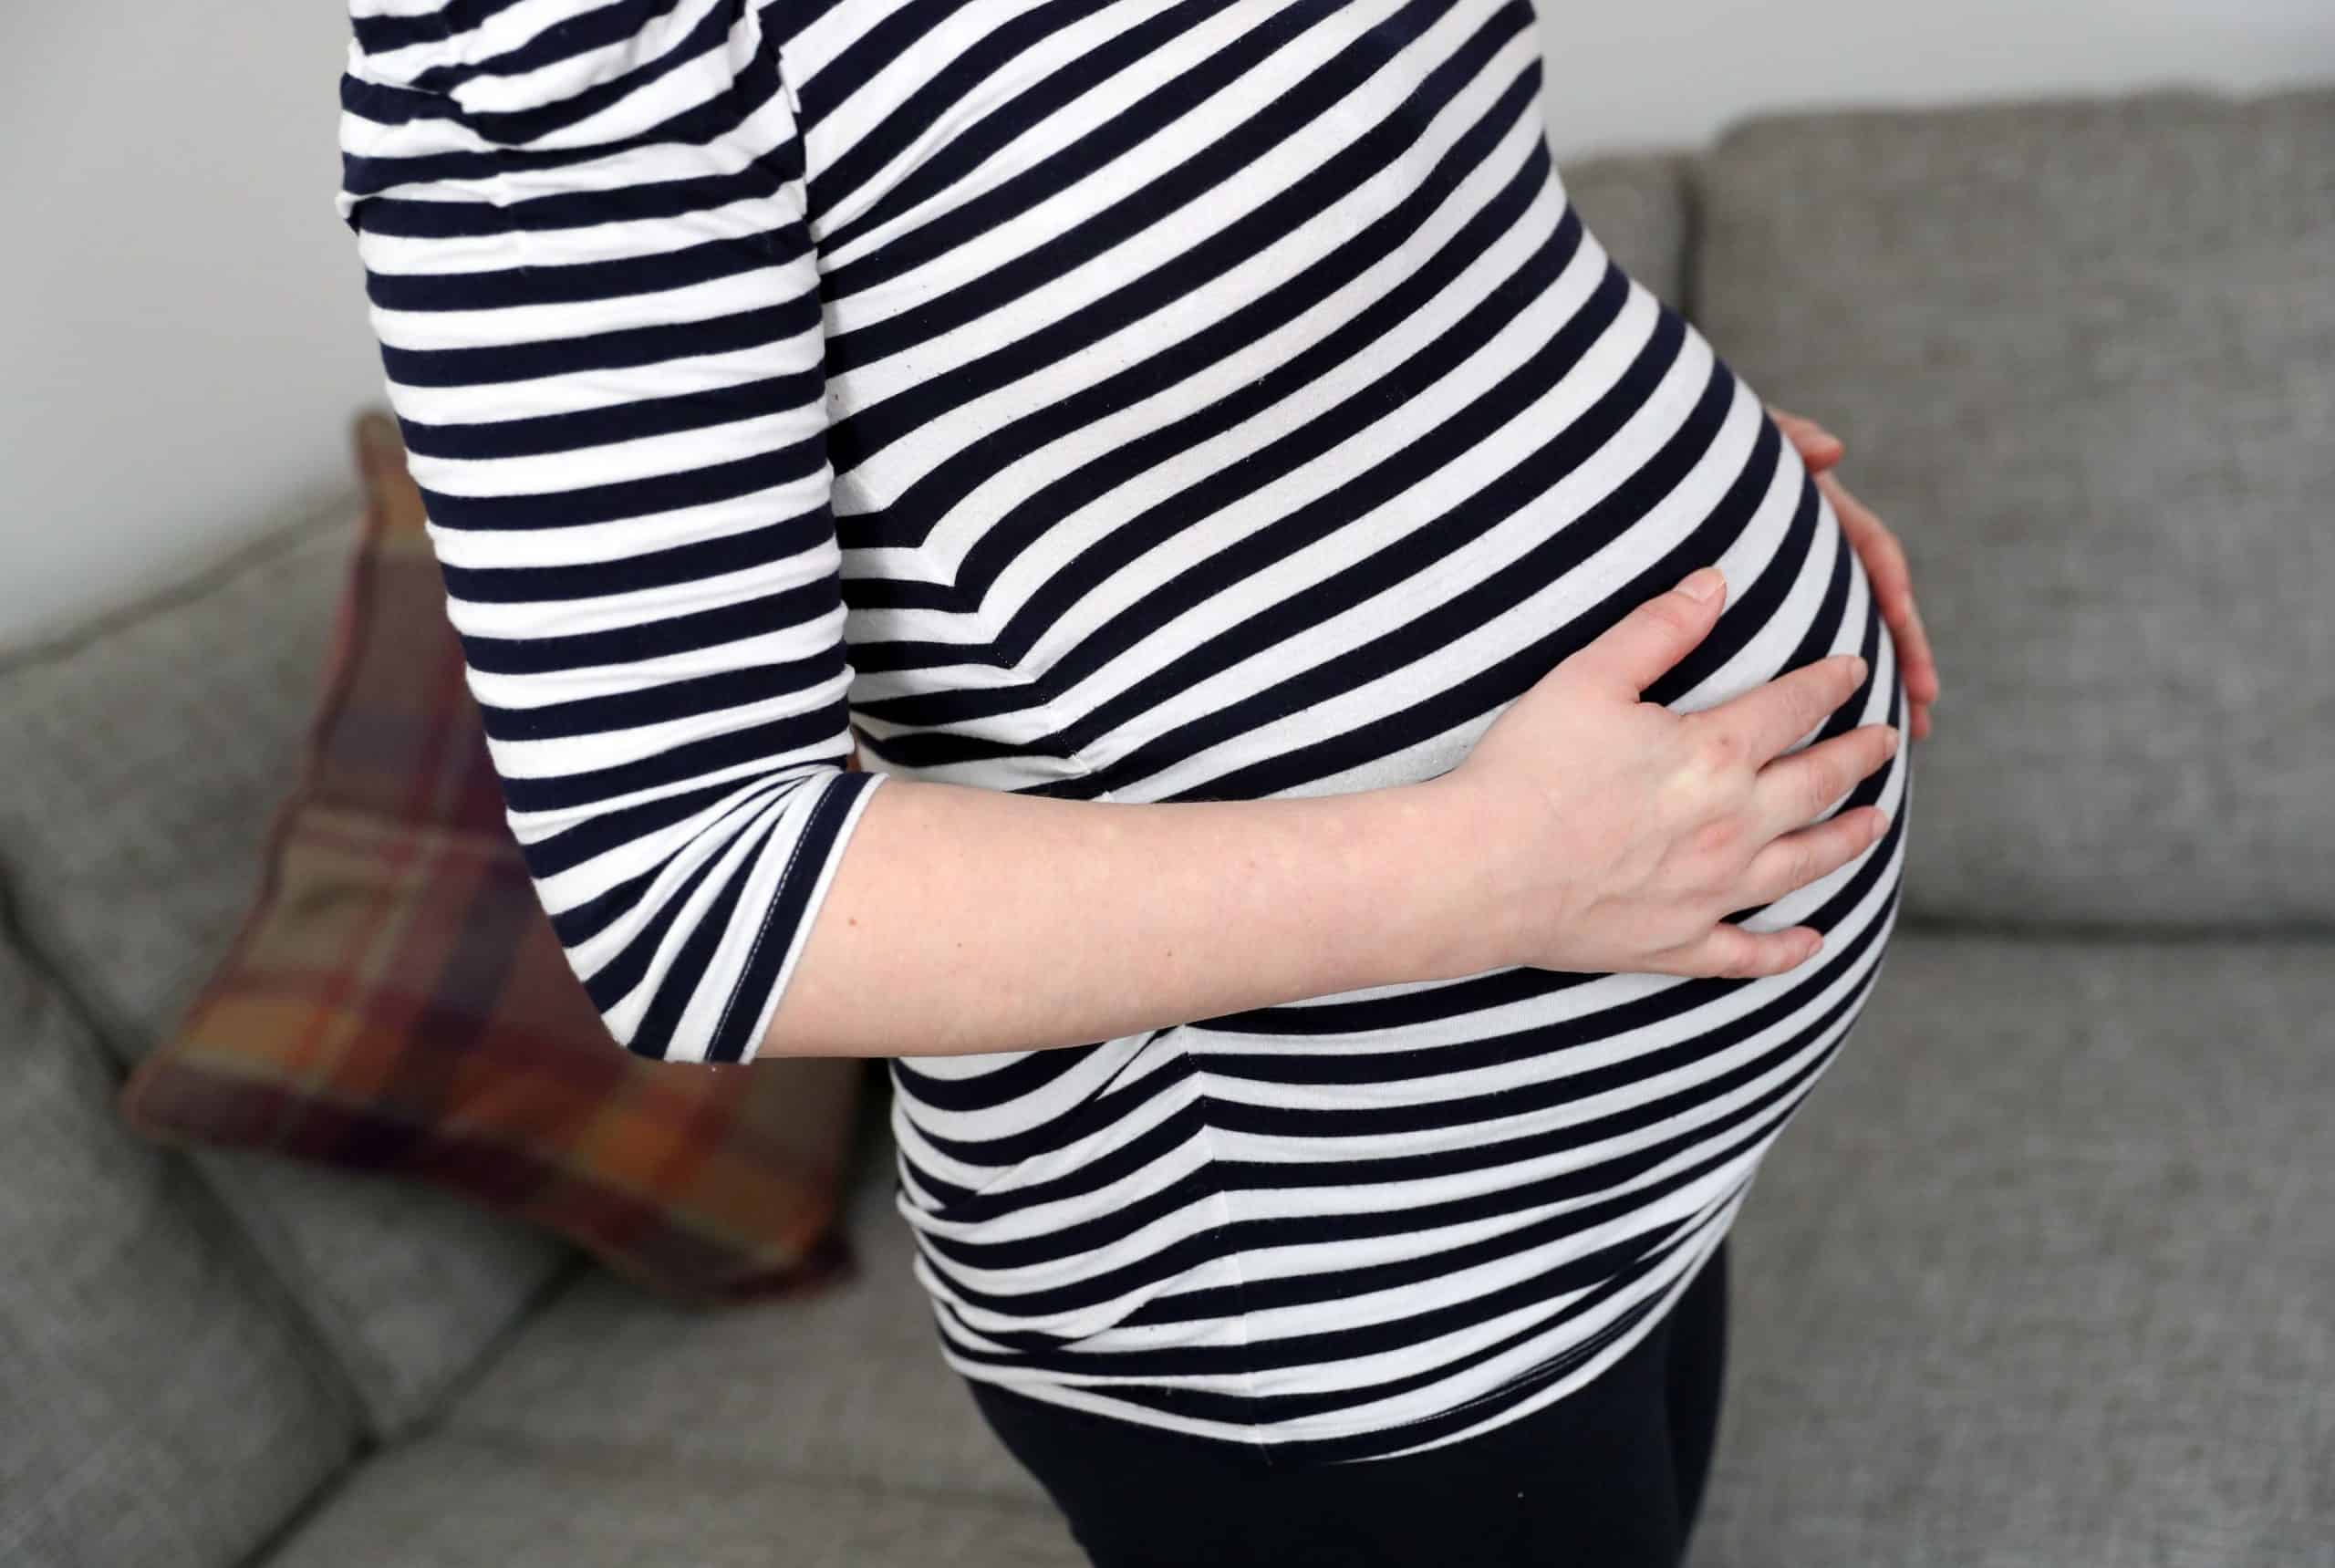 ‘Did we just timehop to the 1950s?’ Outrage at official advice for pregnant women